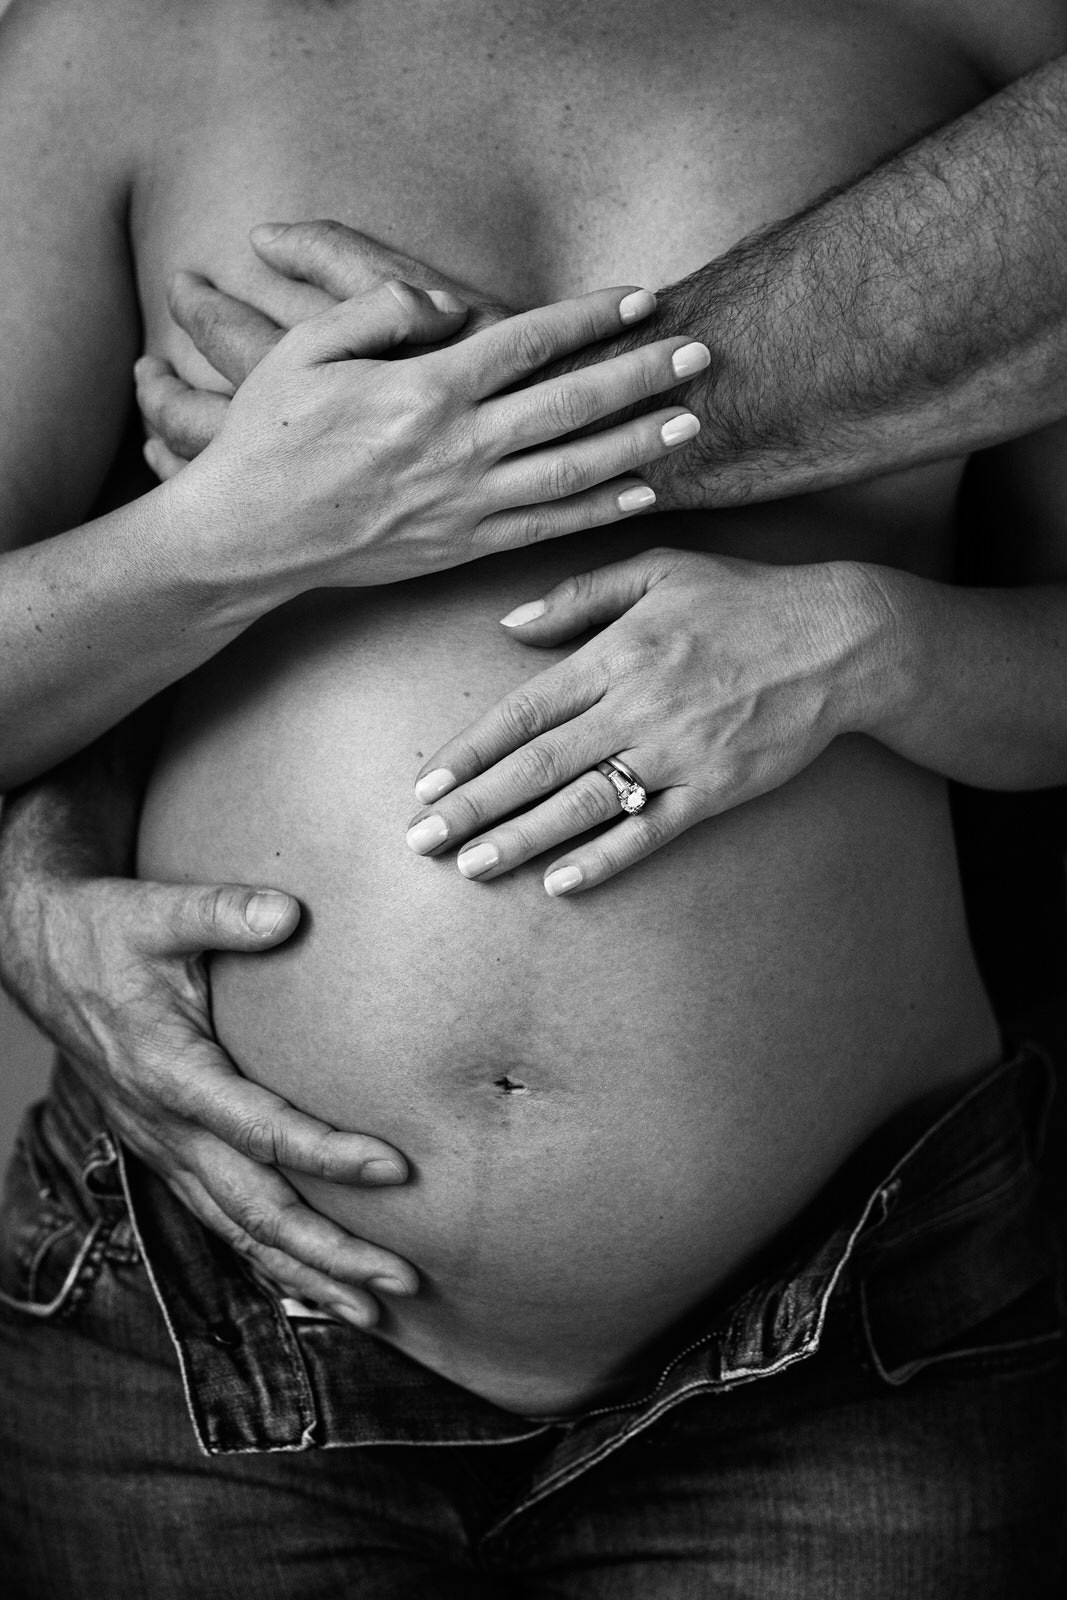 Pregnant woman's belly hugged by father's hand